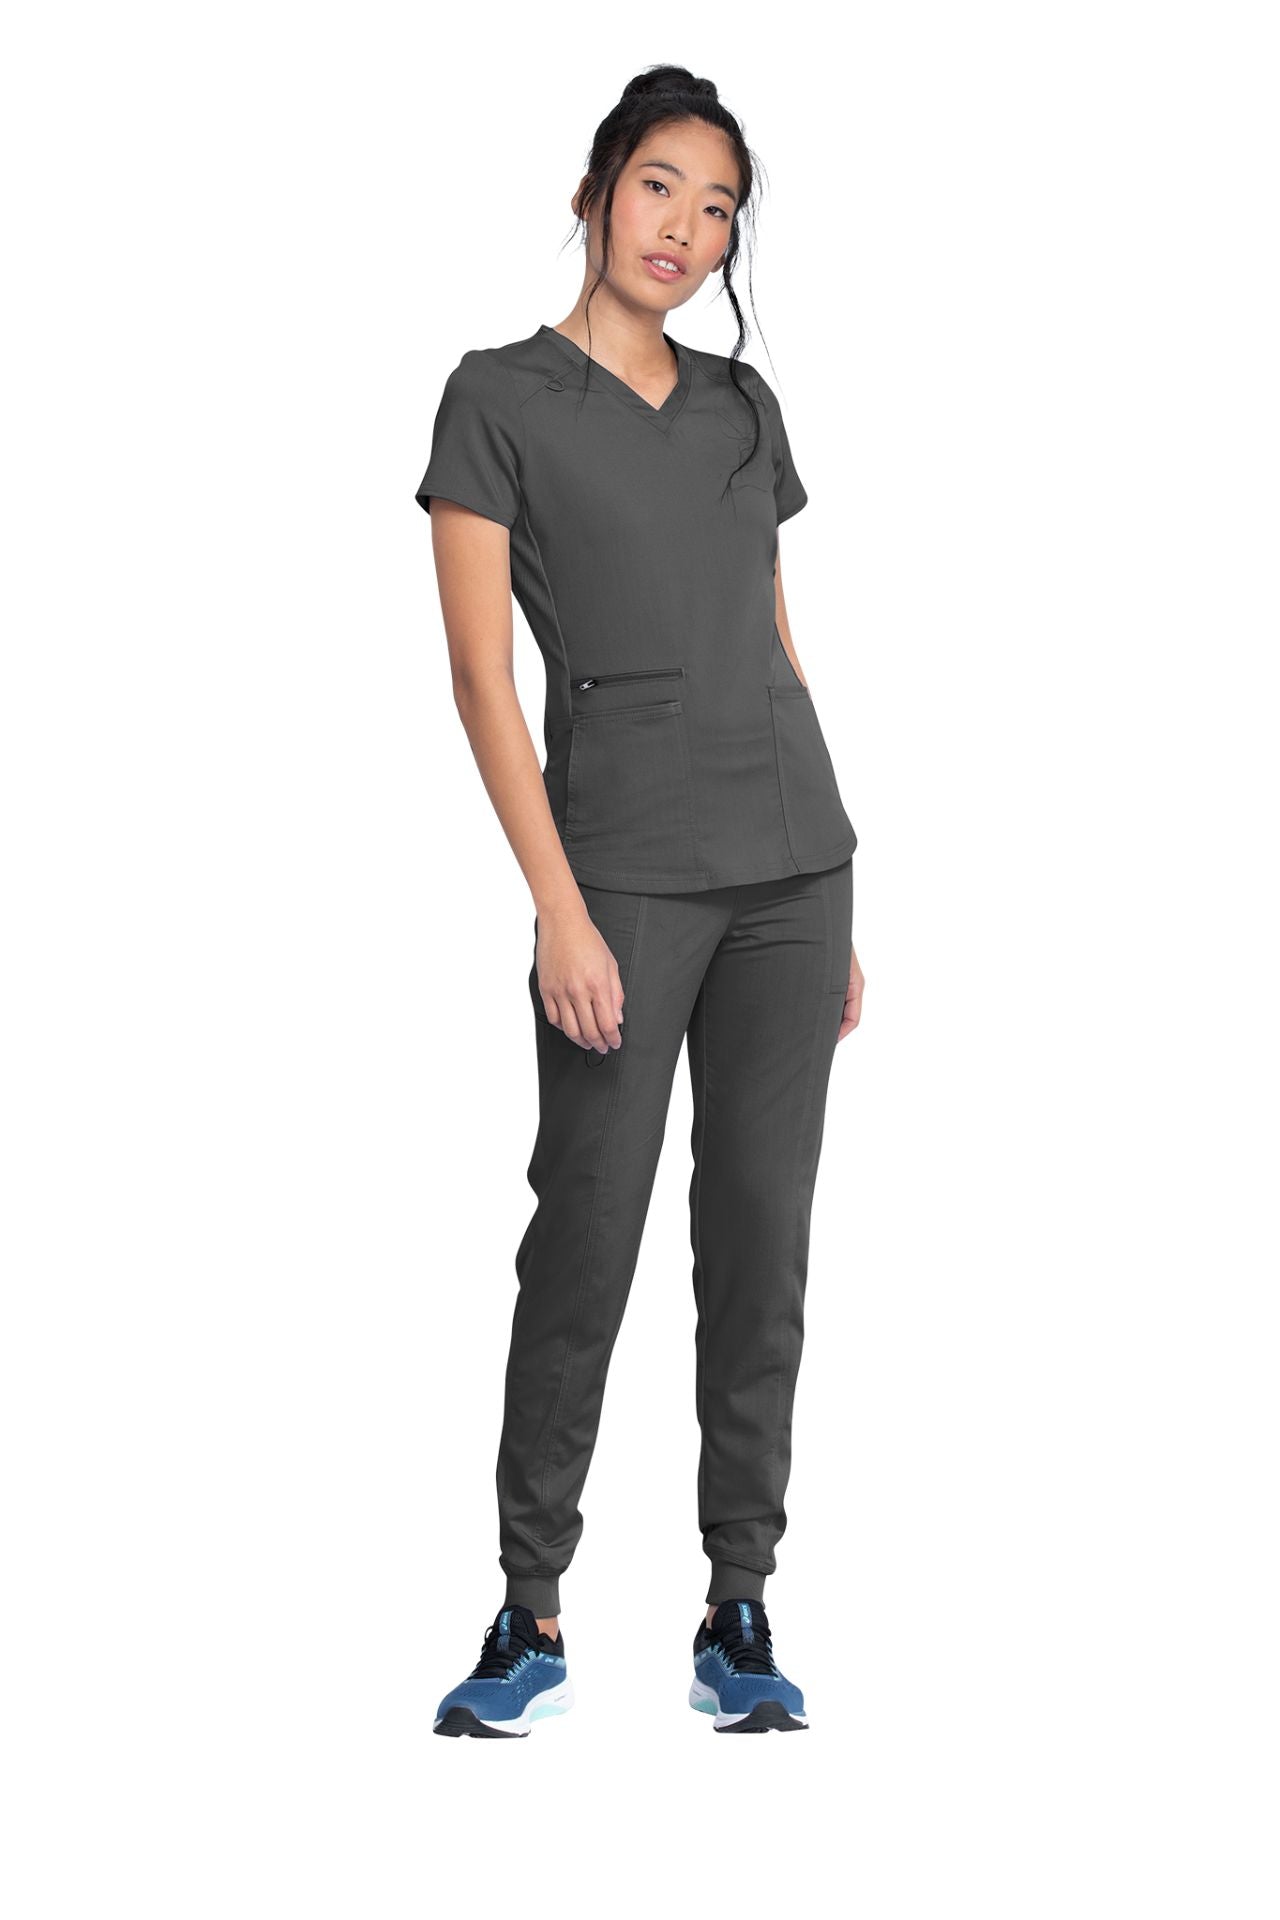 Pewter - Dickies Balance V-Neck Top With Rib Knit Panels